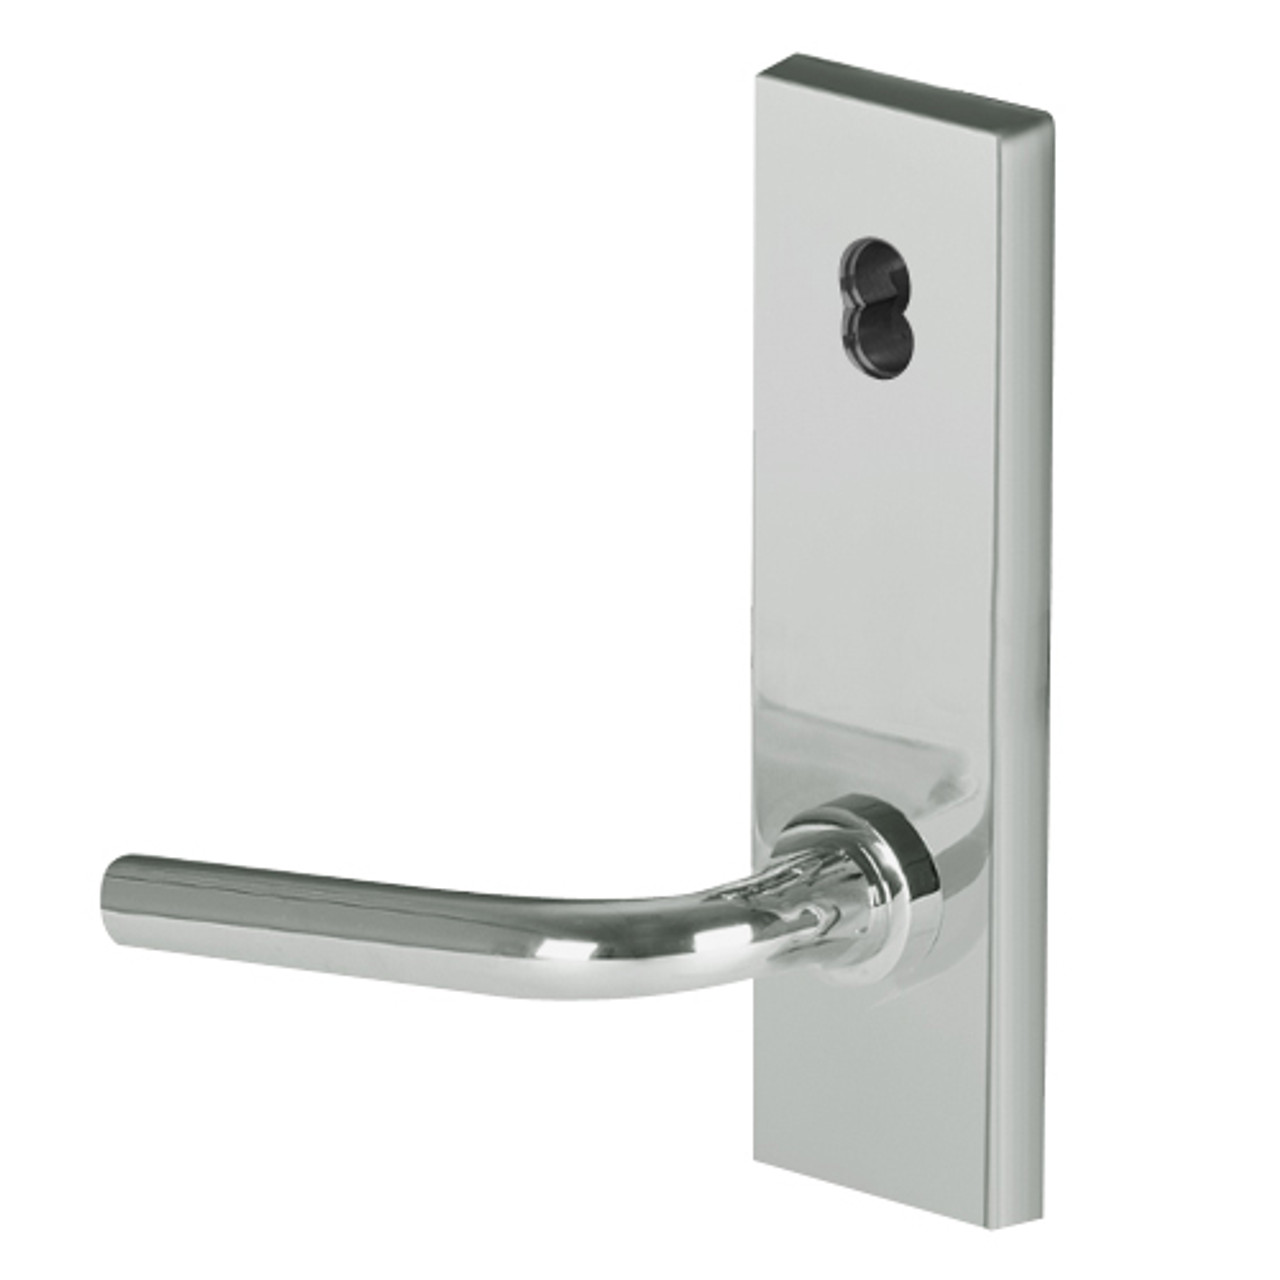 45HW7TWEL12N619 Best 40HW series Double Key Deadbolt Fail Safe Electromechanical Mortise Lever Lock with Solid Tube w/ No Return Style in Satin Nickel